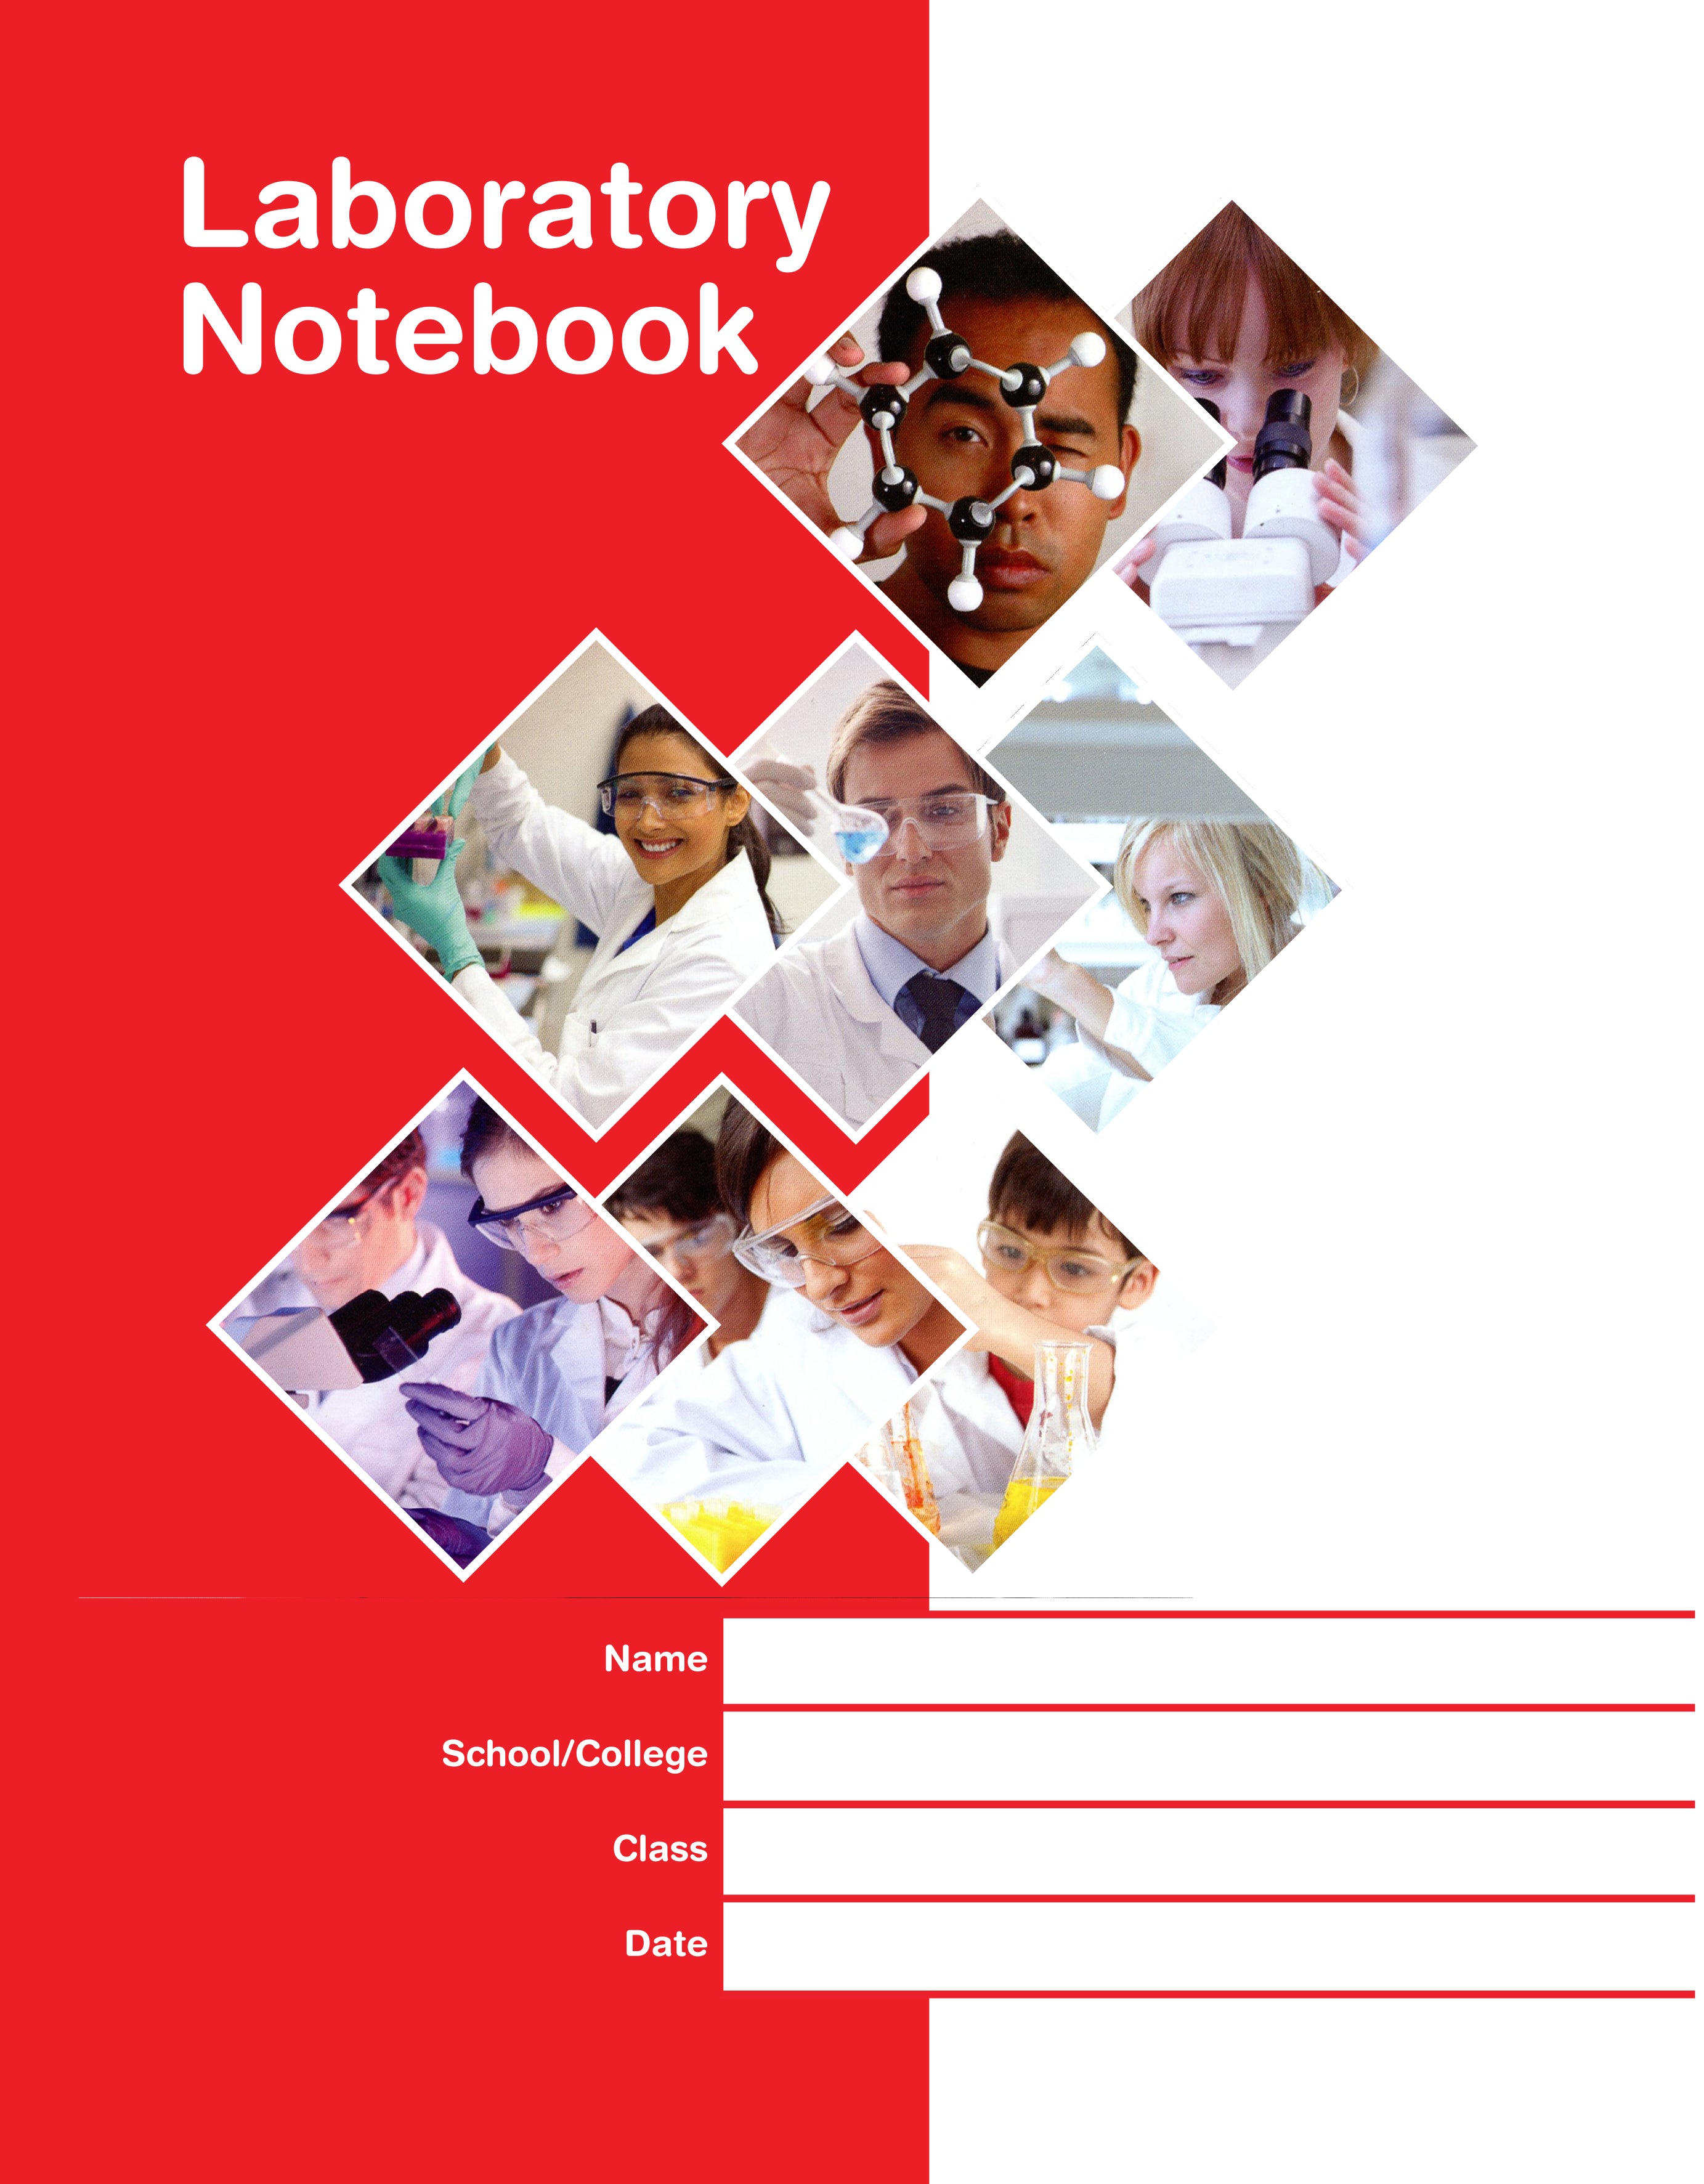 mitchells-lab-notebooks-code-s01-a4-laboratory-notebooks-for-schools